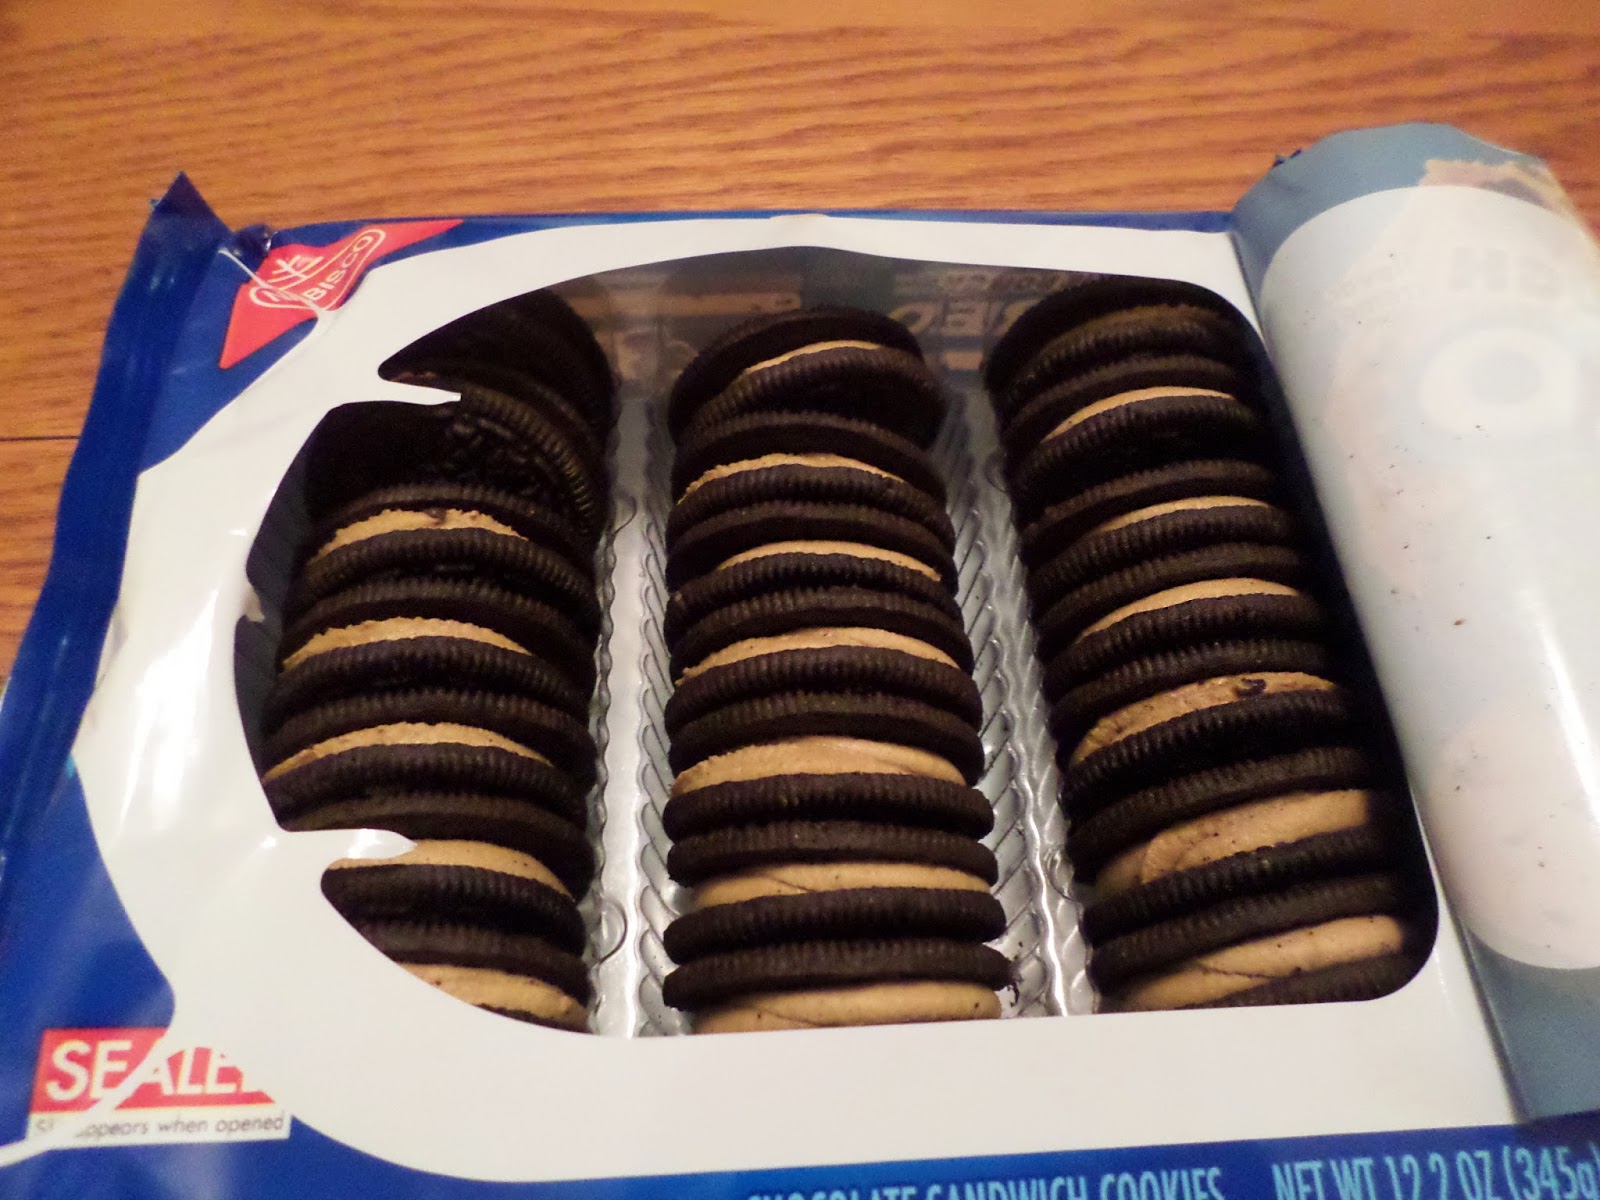 Limited Edition Cookie Dough Oreo